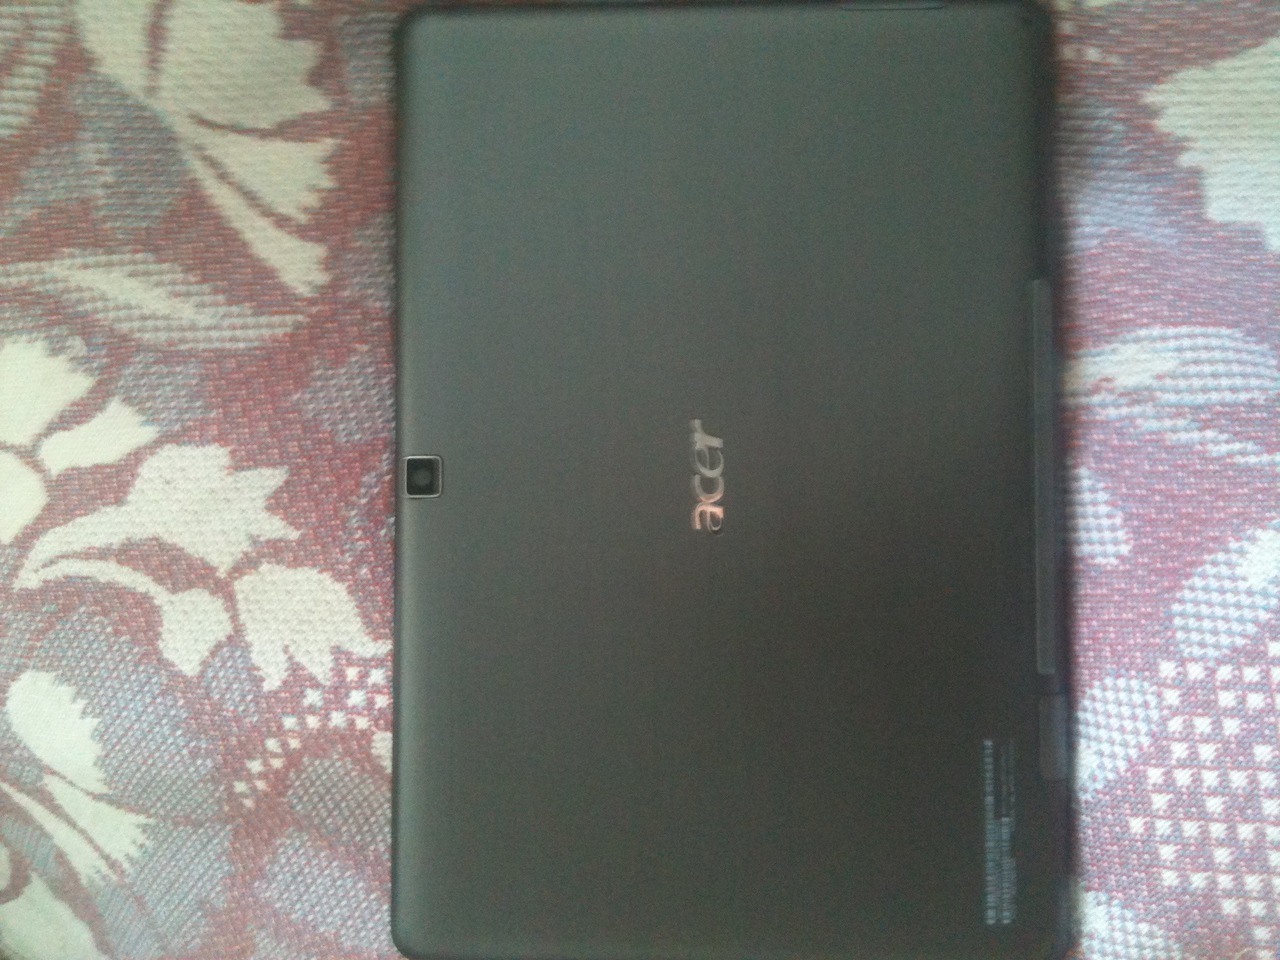 Acer w500 tab w7 8 recovery disc sets